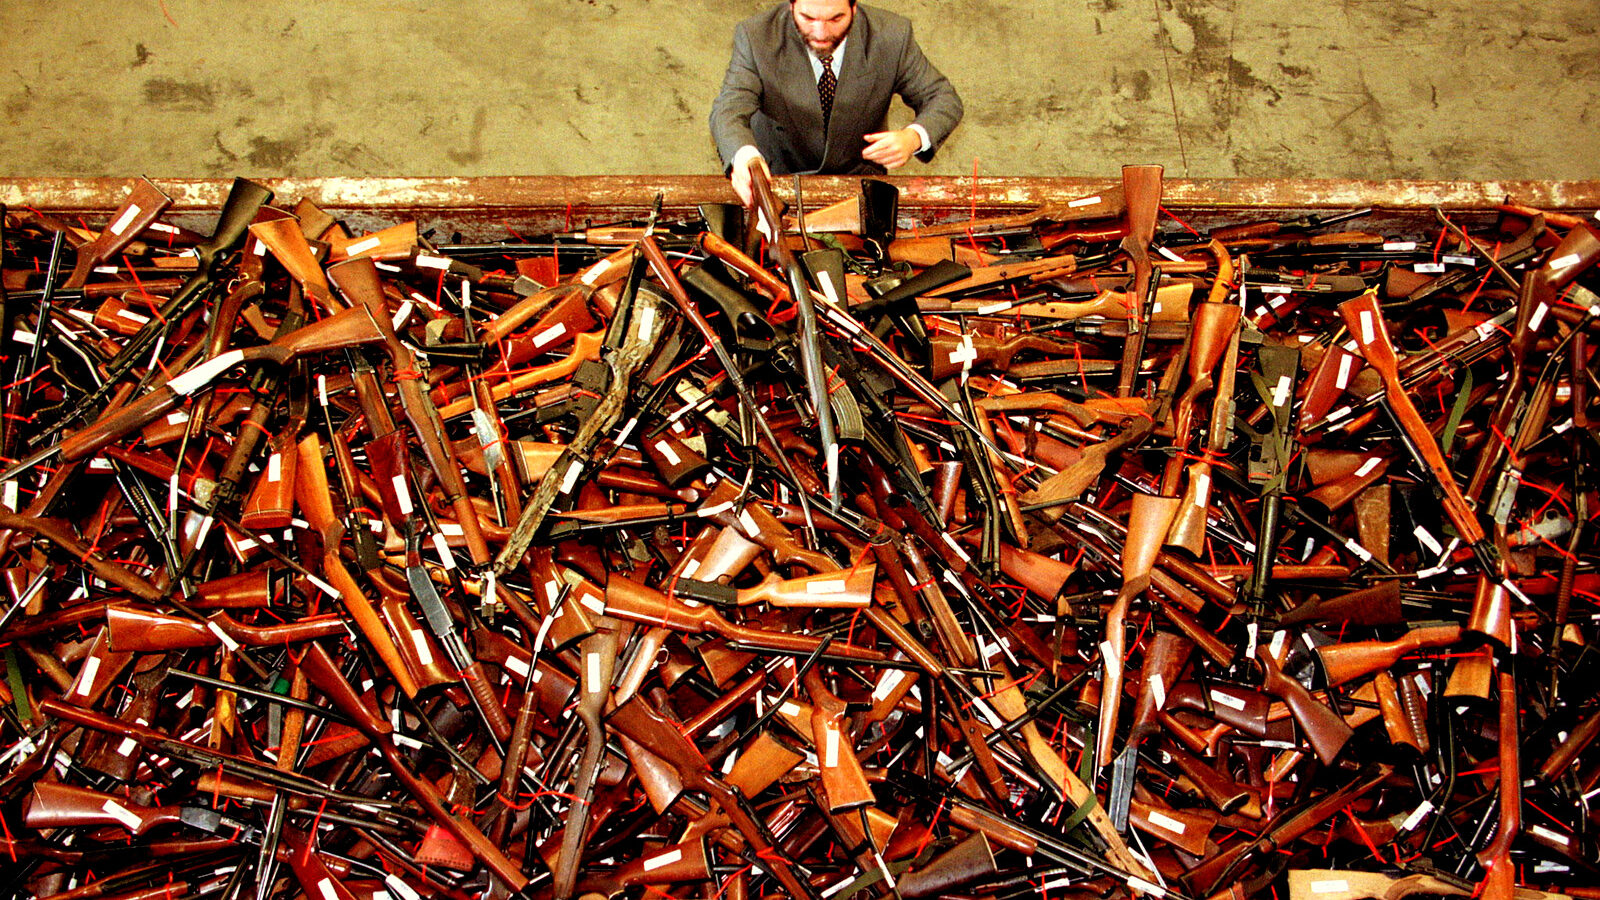 A pile of about 4,500 firearms that were handed over as part of Australia's buyback. David Gray/Reuters